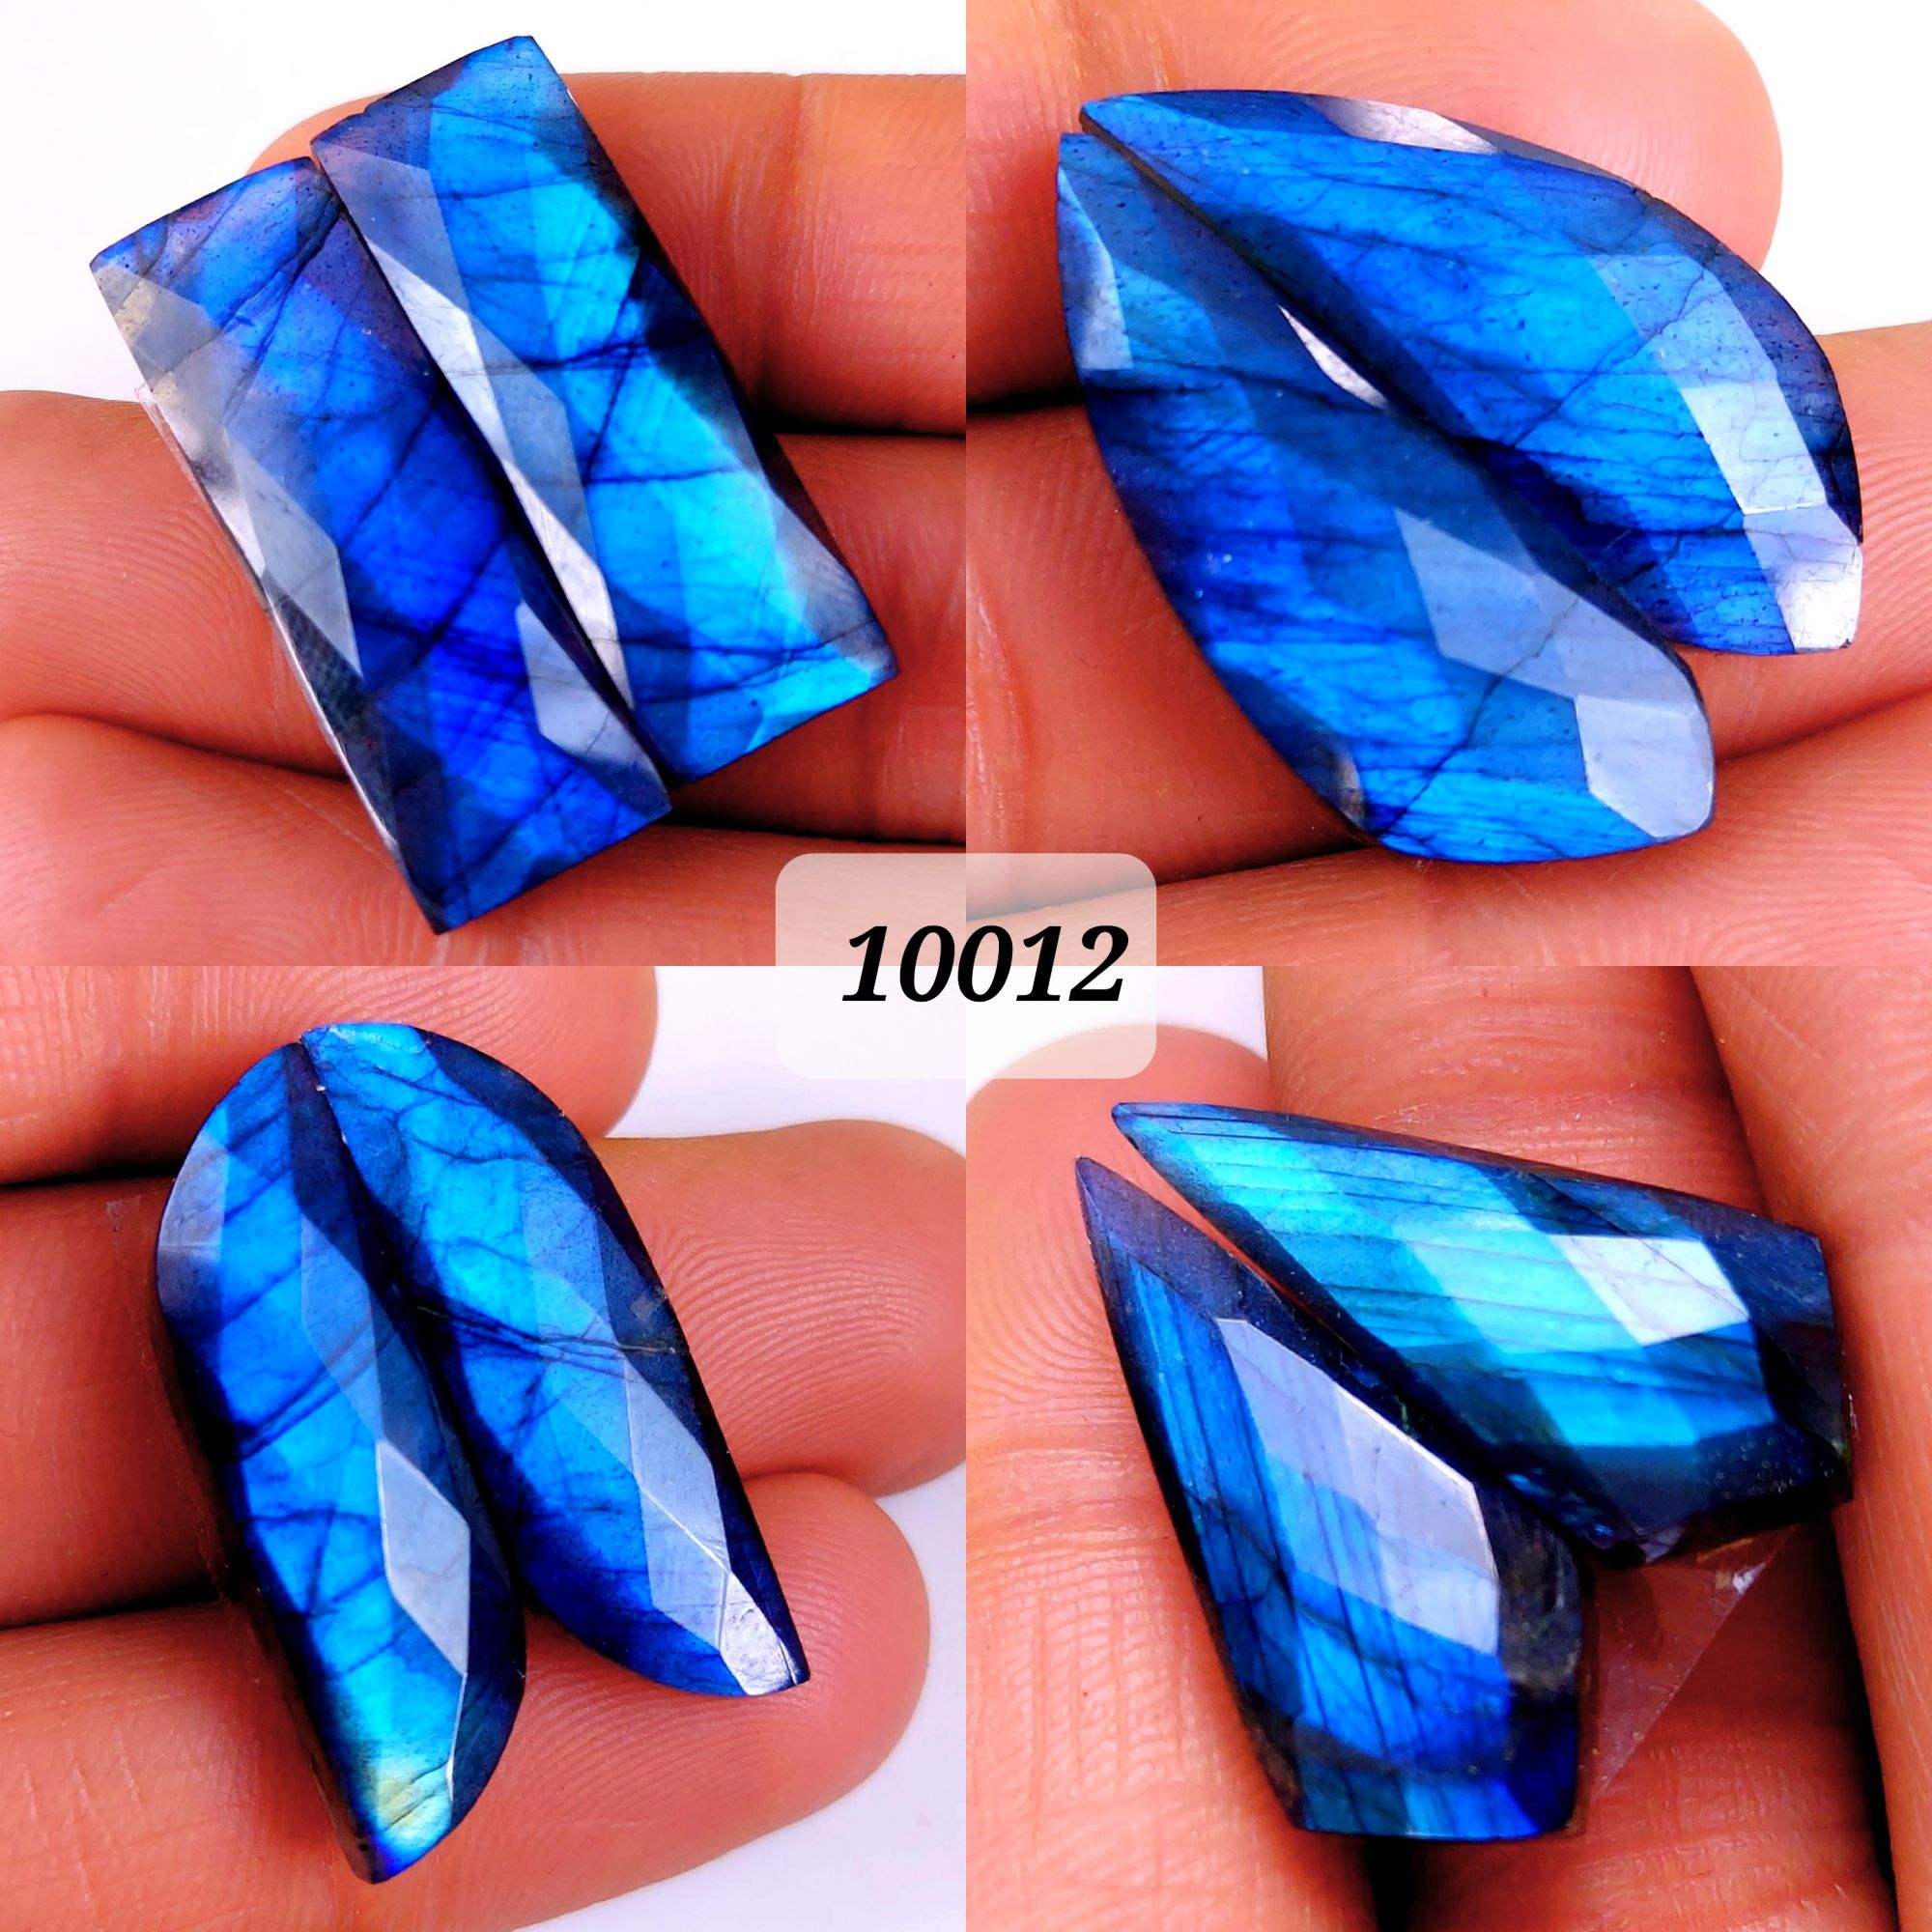 4Pair 119Cts Natural Labradorite Blue Fire Faceted Dangle Drop Earrings Semi Precious Crystal For Hoop Earrings Blue Gemstone Cabochon Matching pair 32x10 30x12mm #10012